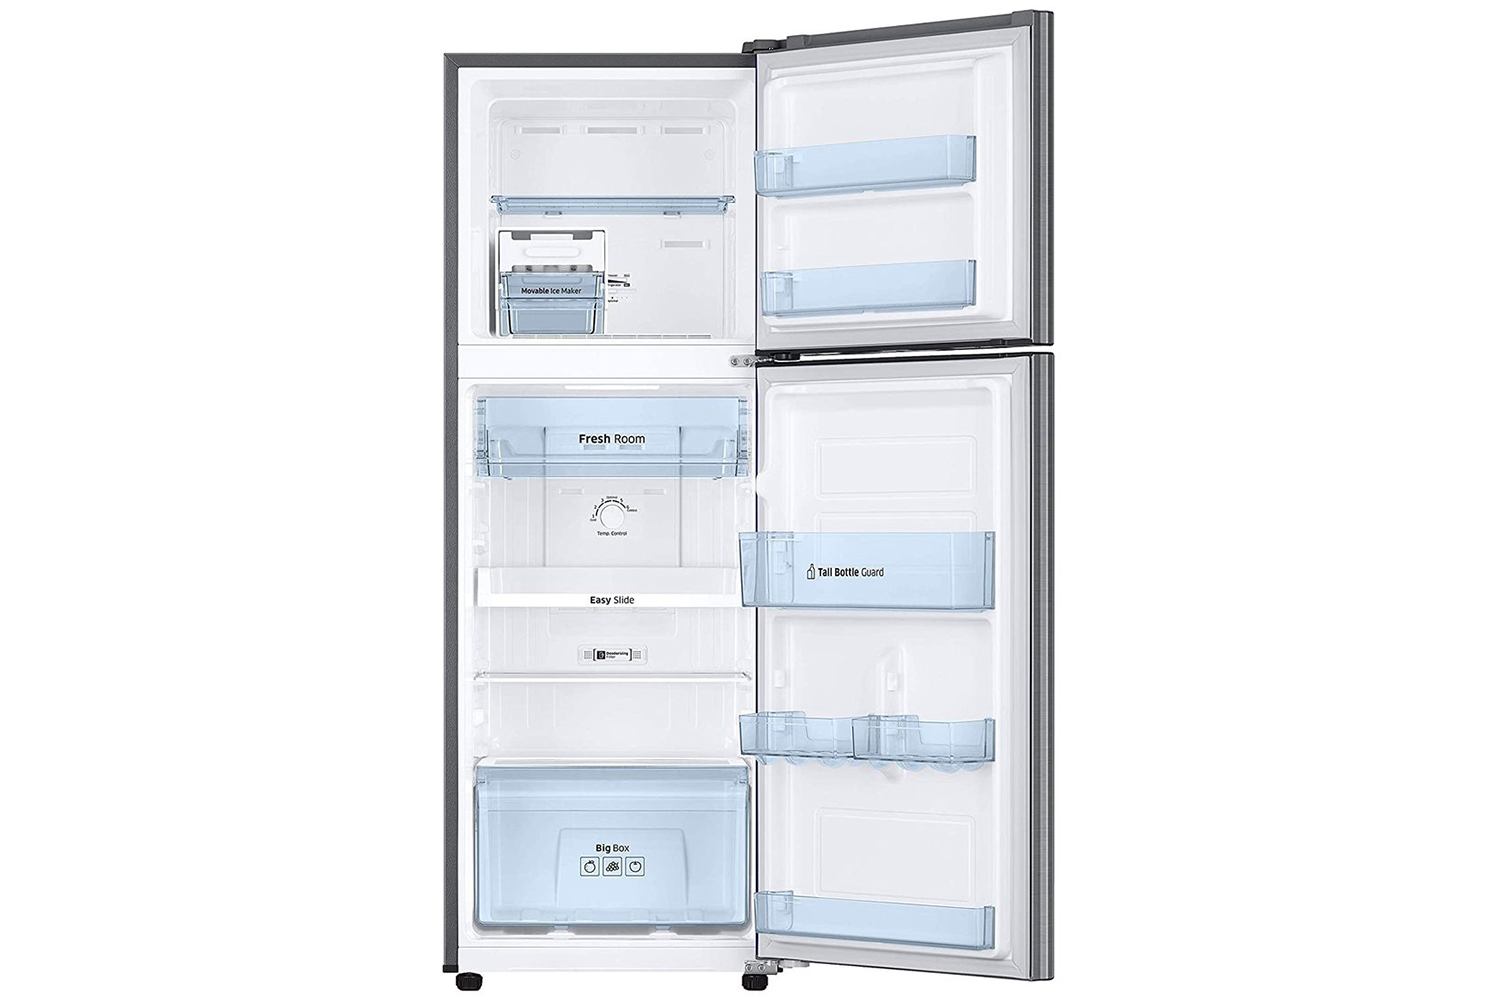 Samsung 253 L 2 Star RT28A3022GS/NL Inverter Frost-Free Double Door Refrigerator ( Grey Silver)